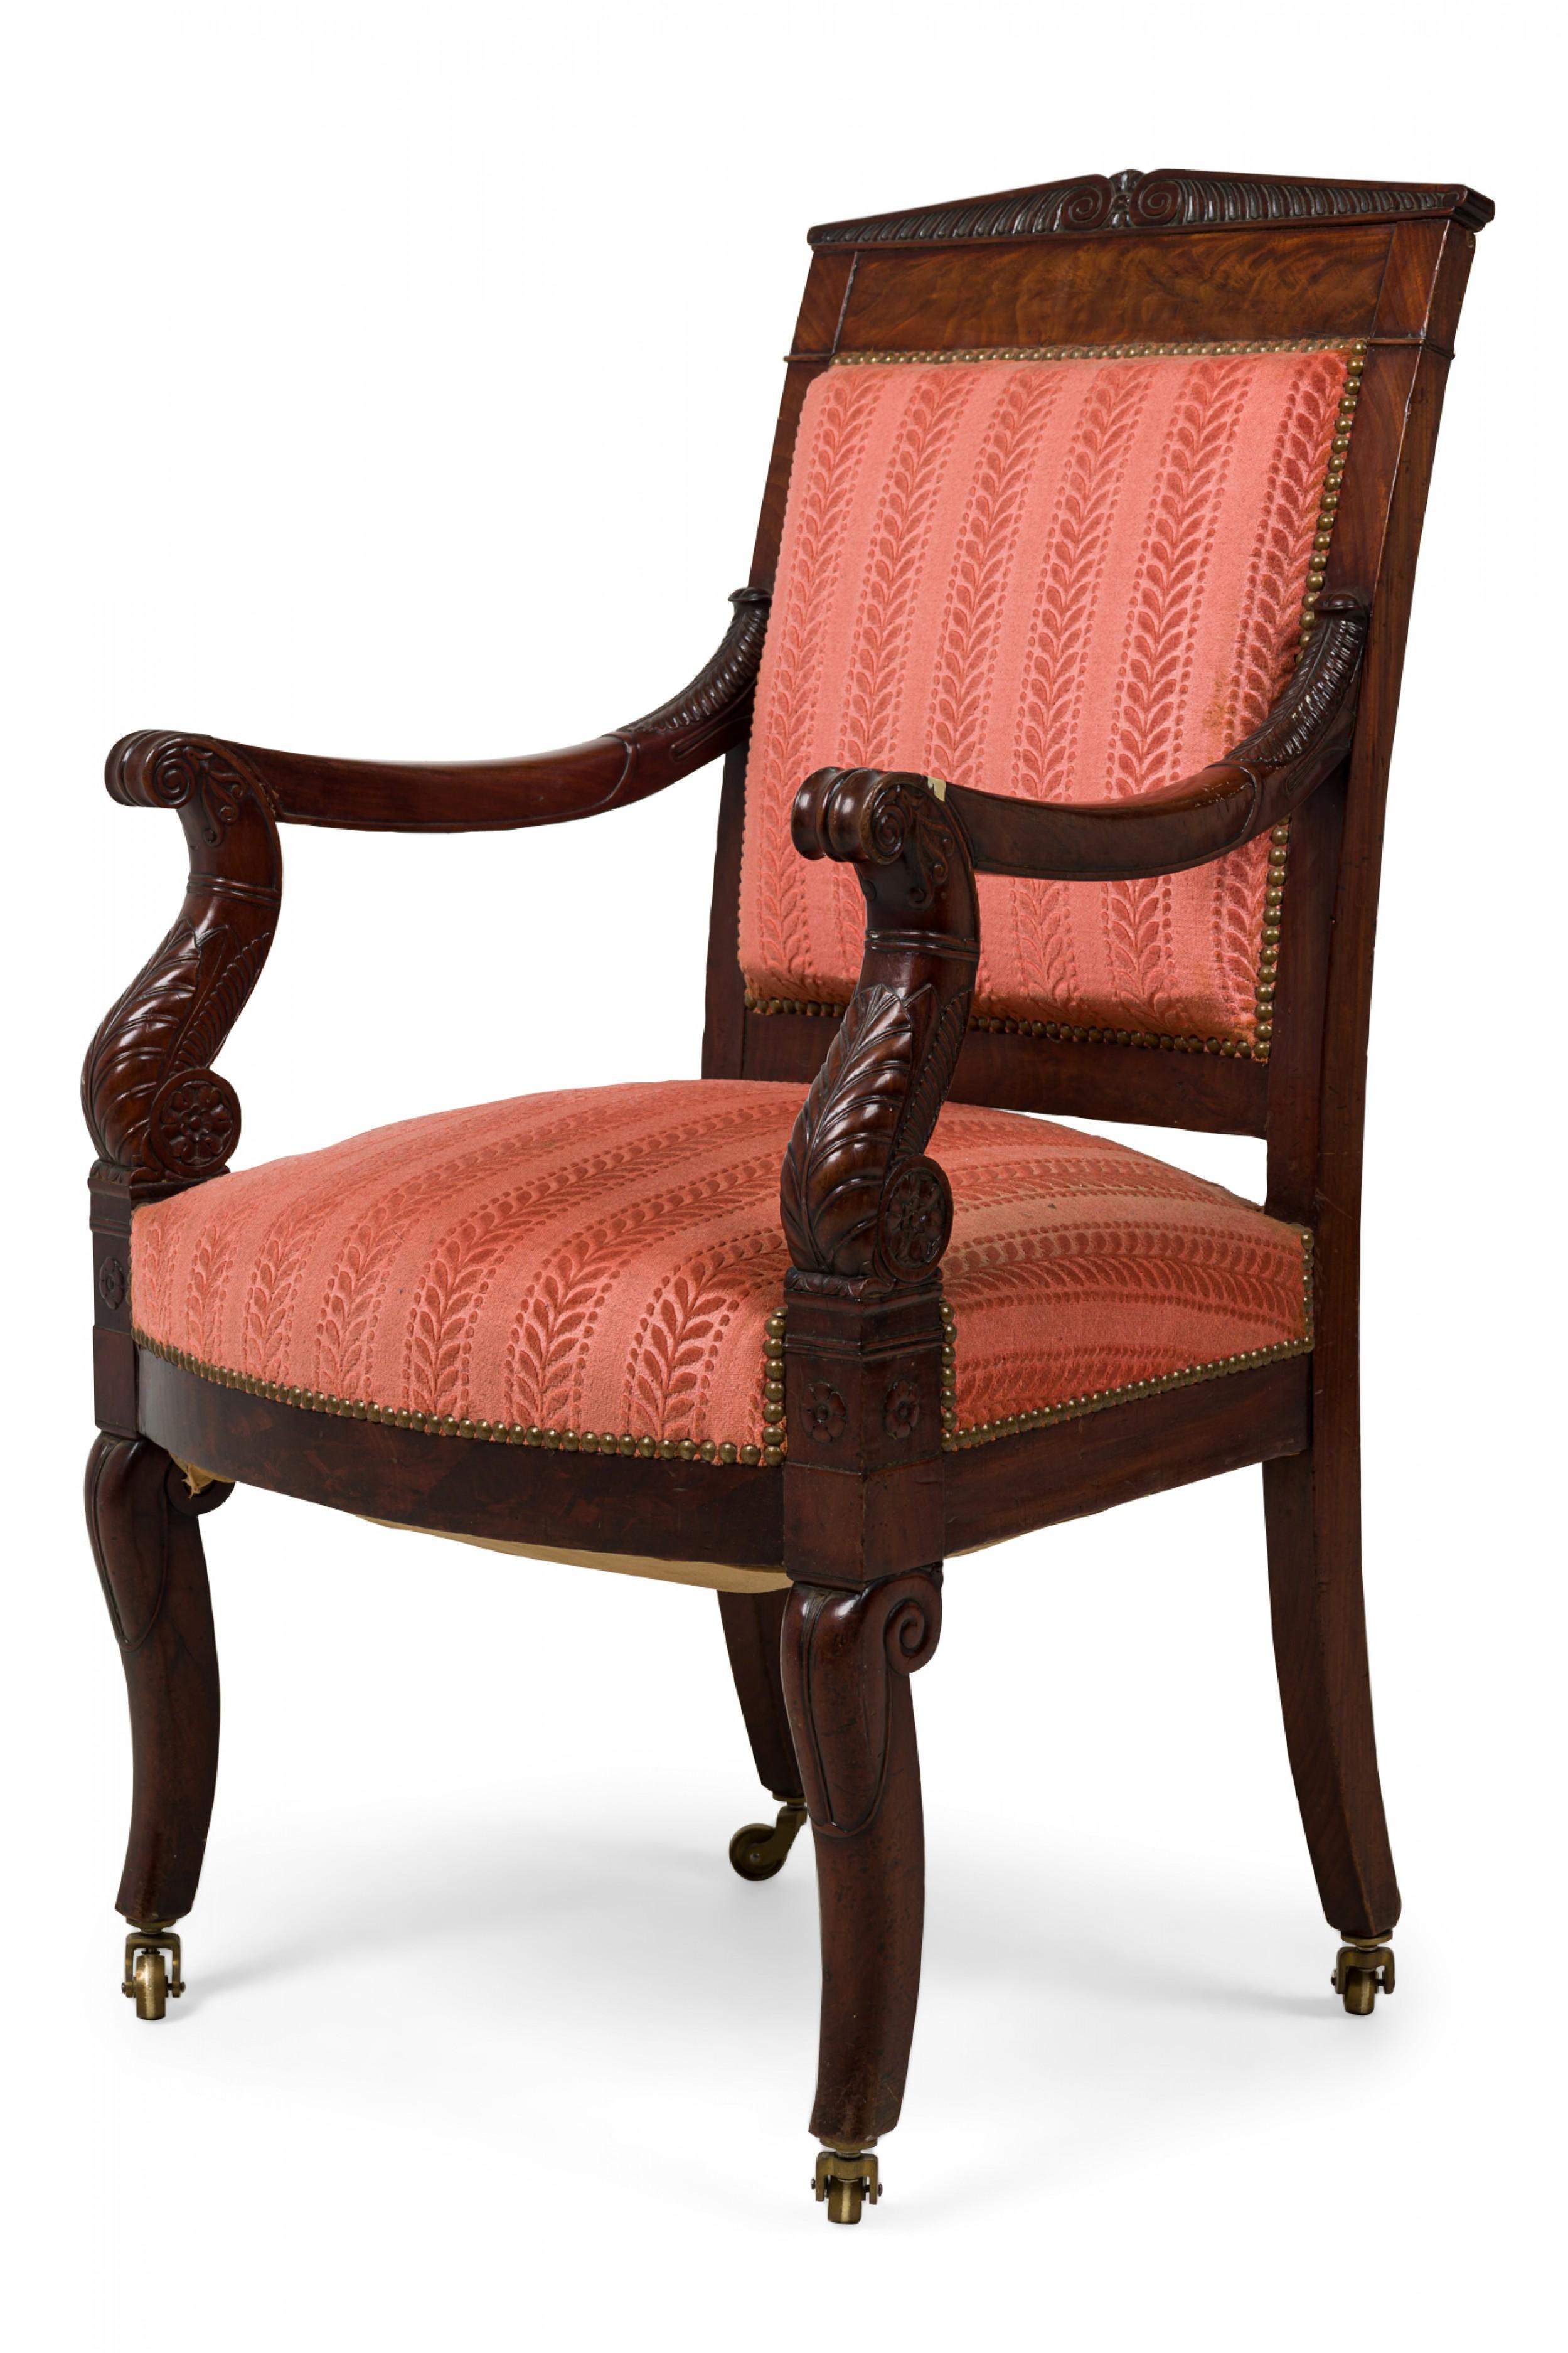 French Restoration mahogany armchair having a rectangular headrest topped by a tapering gadrooned crest, upturned scroll arms with acanthus embellishments, upholstered back and seat in a coral leaf-striped damask fabric with brass nailhead trim,